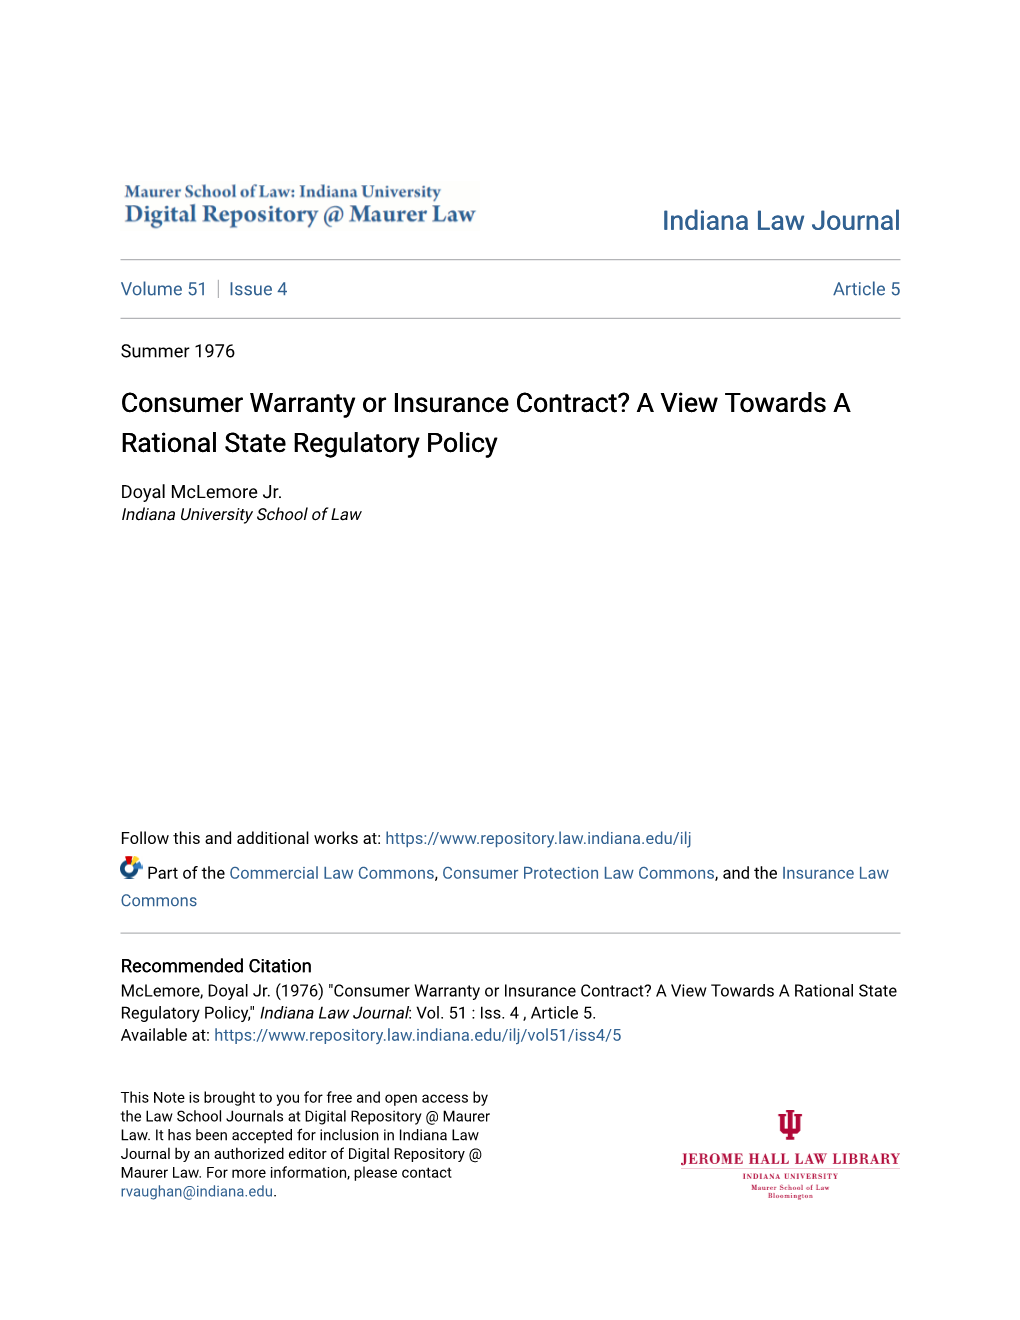 Consumer Warranty Or Insurance Contract? a View Towards a Rational State Regulatory Policy